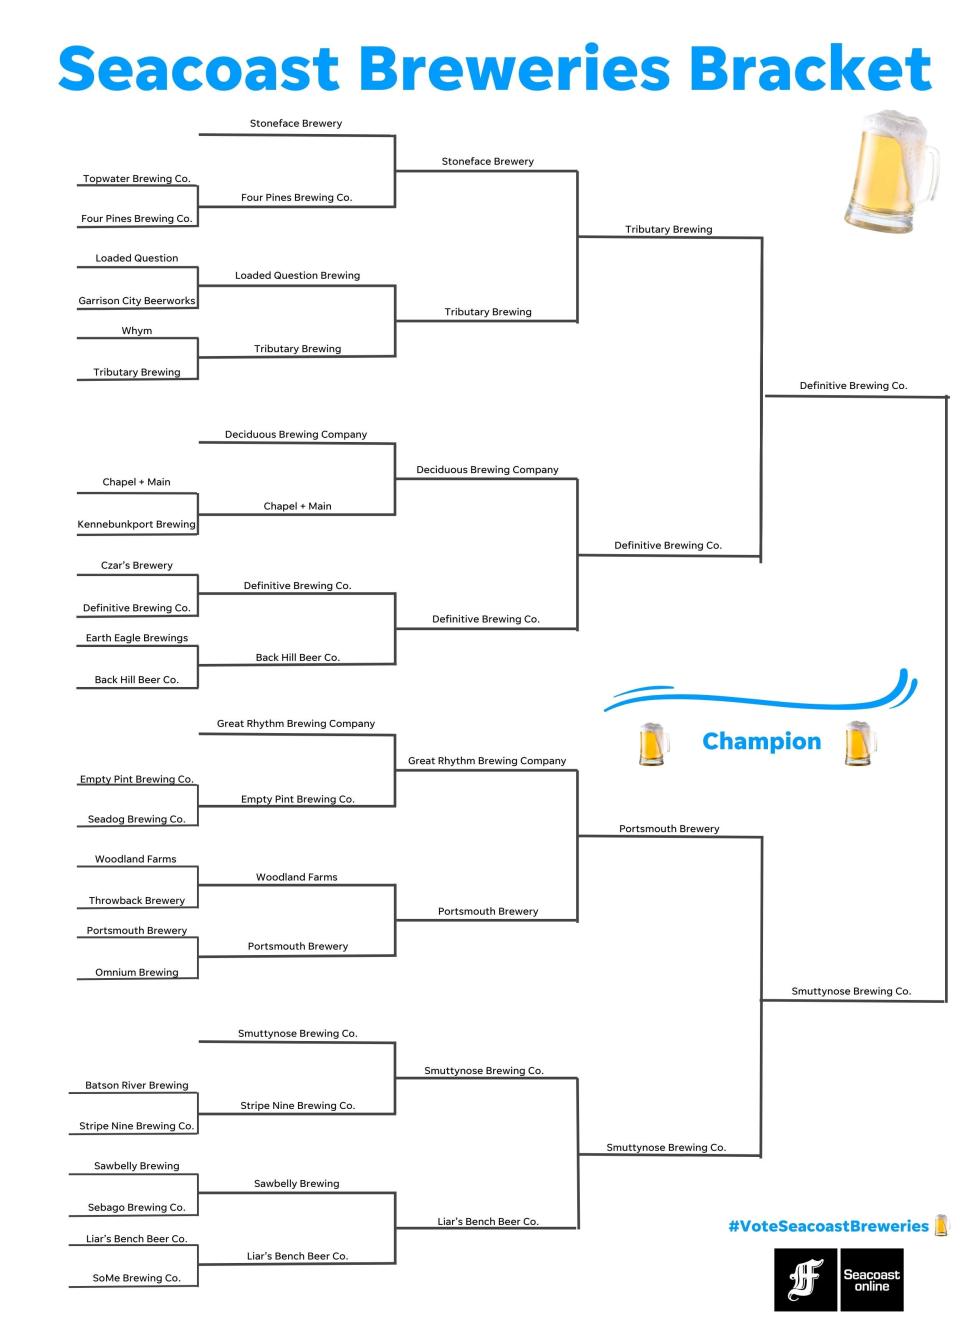 Definitive Brewing Co. and Smuttynose Brewing Co. have reached the final round of the Seacoast Breweries Bracket. The competition,  in which our readers vote for the winners, started with 28 local breweries.